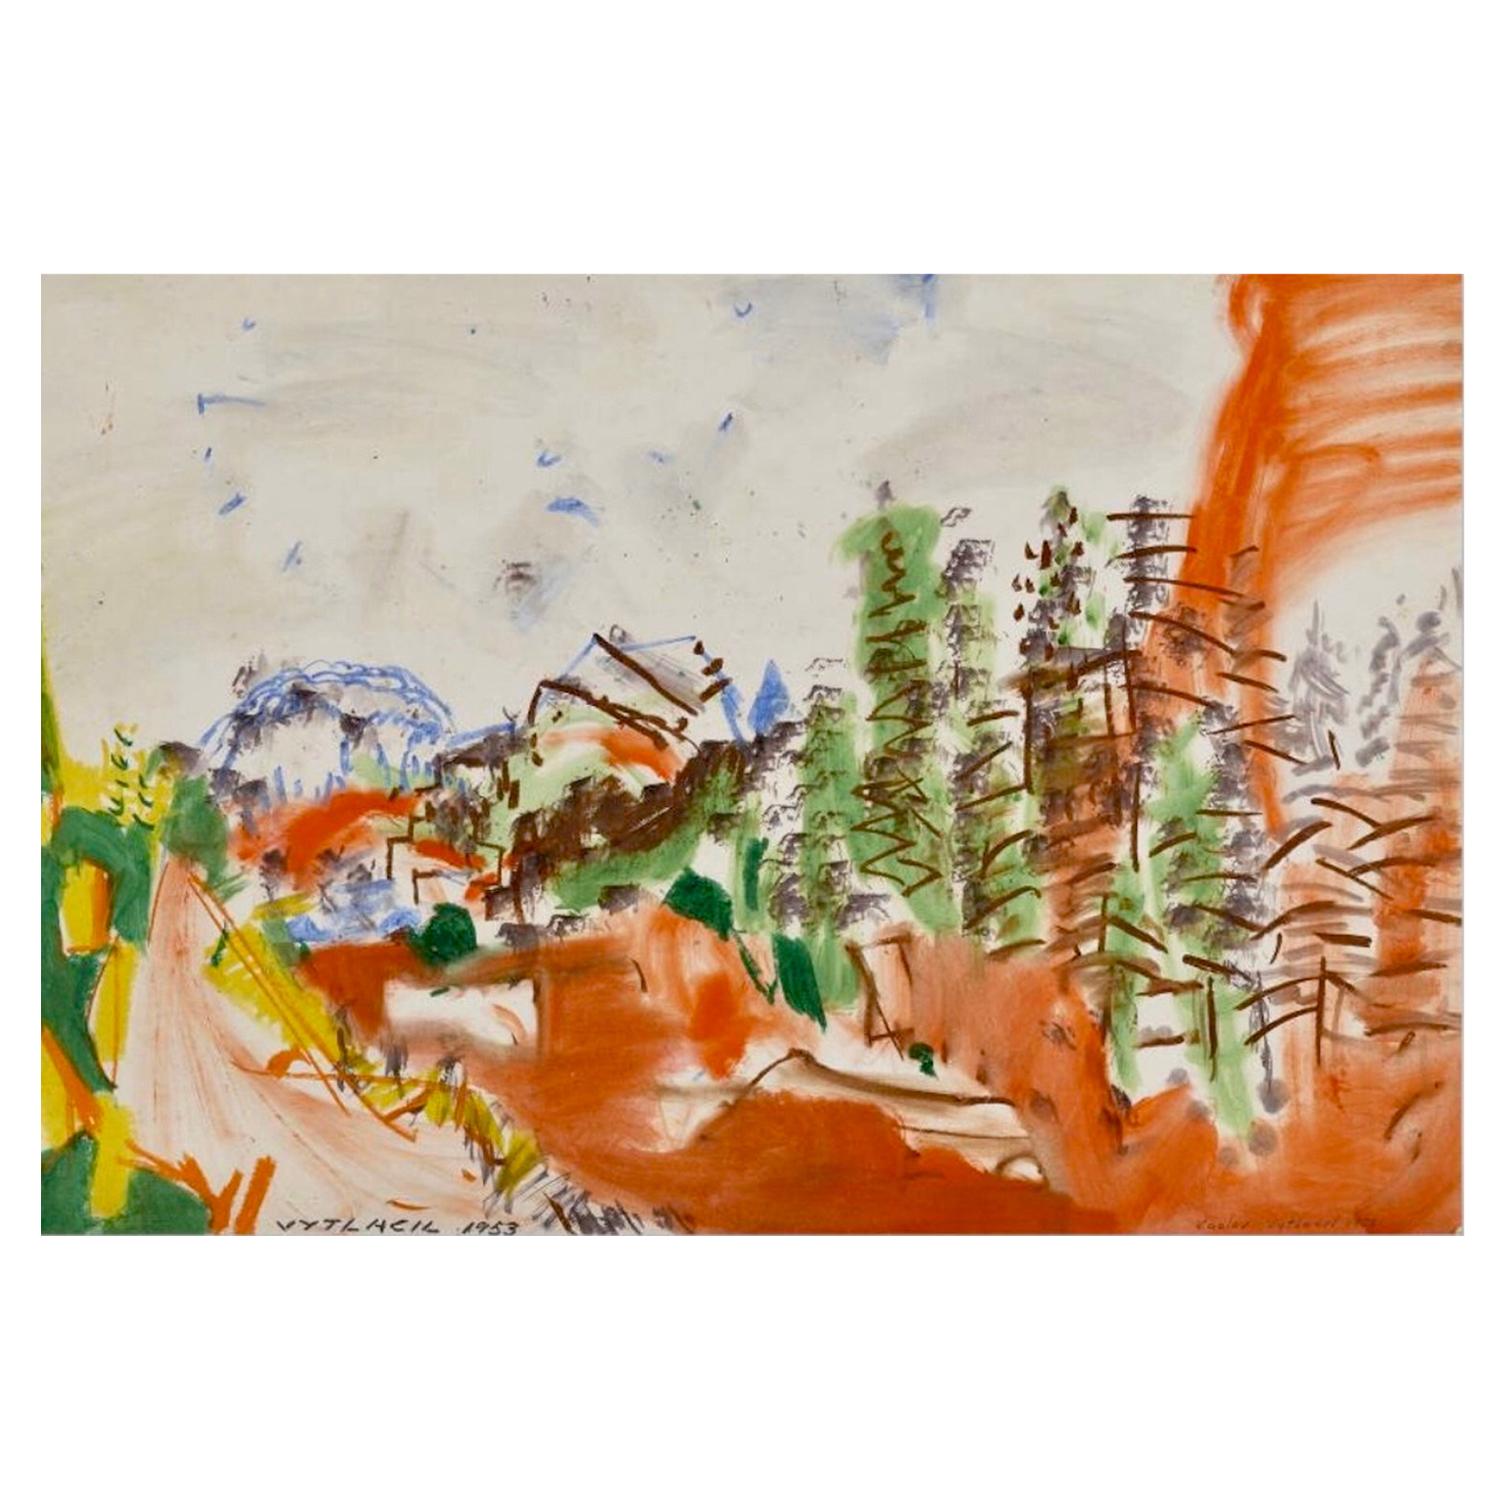 "Colorado Summer" by Vaclav Vytlacil, mixed media on paper For Sale